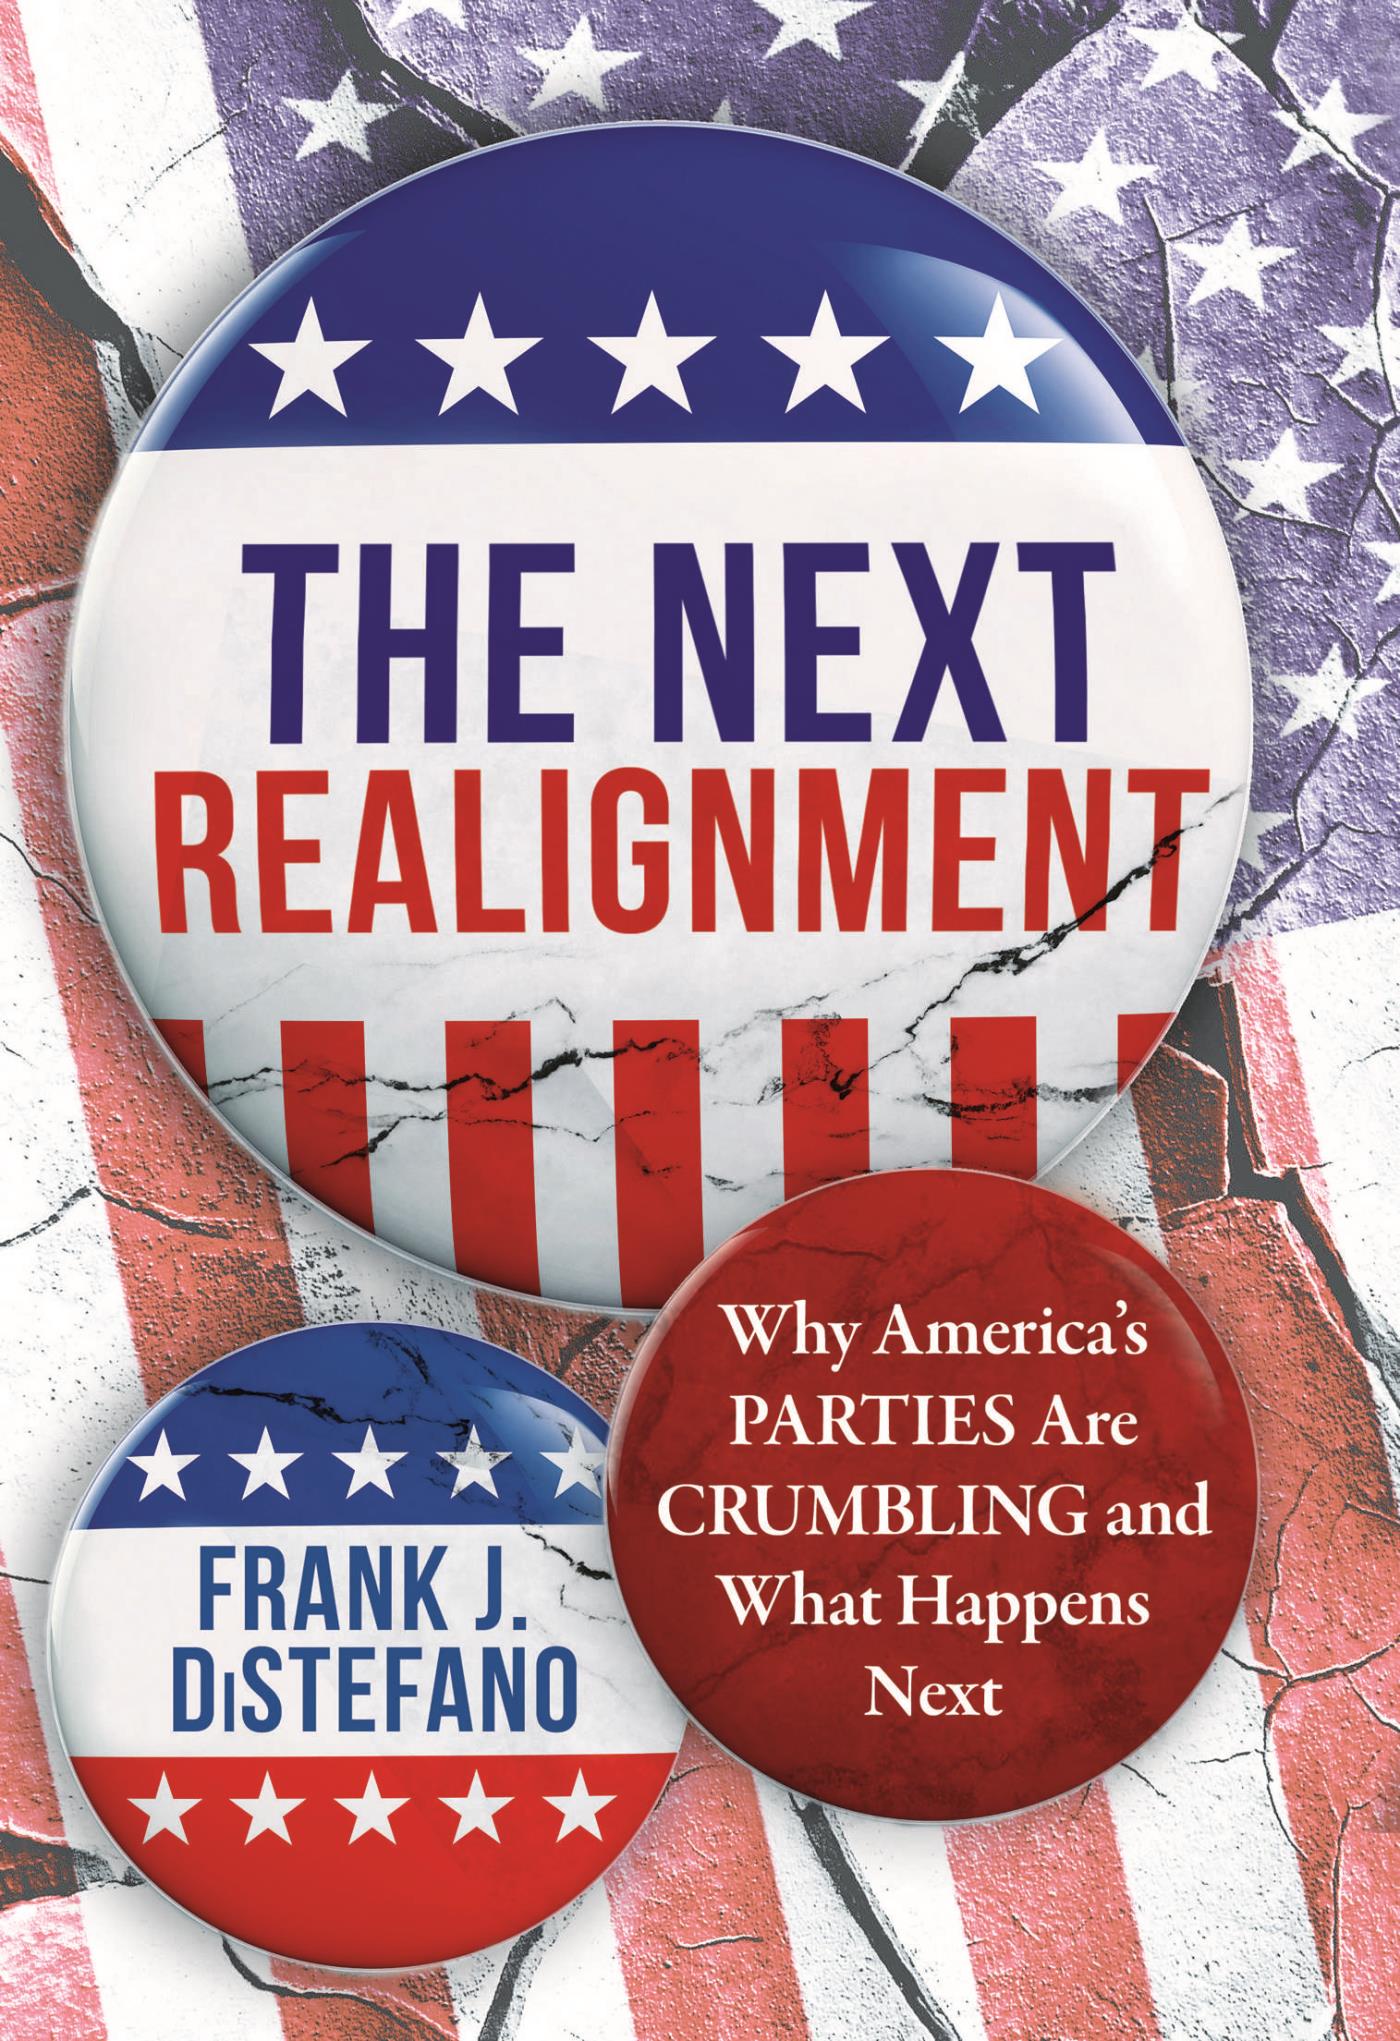 The next realignment why America's parties are crumbling and what happens next cover image